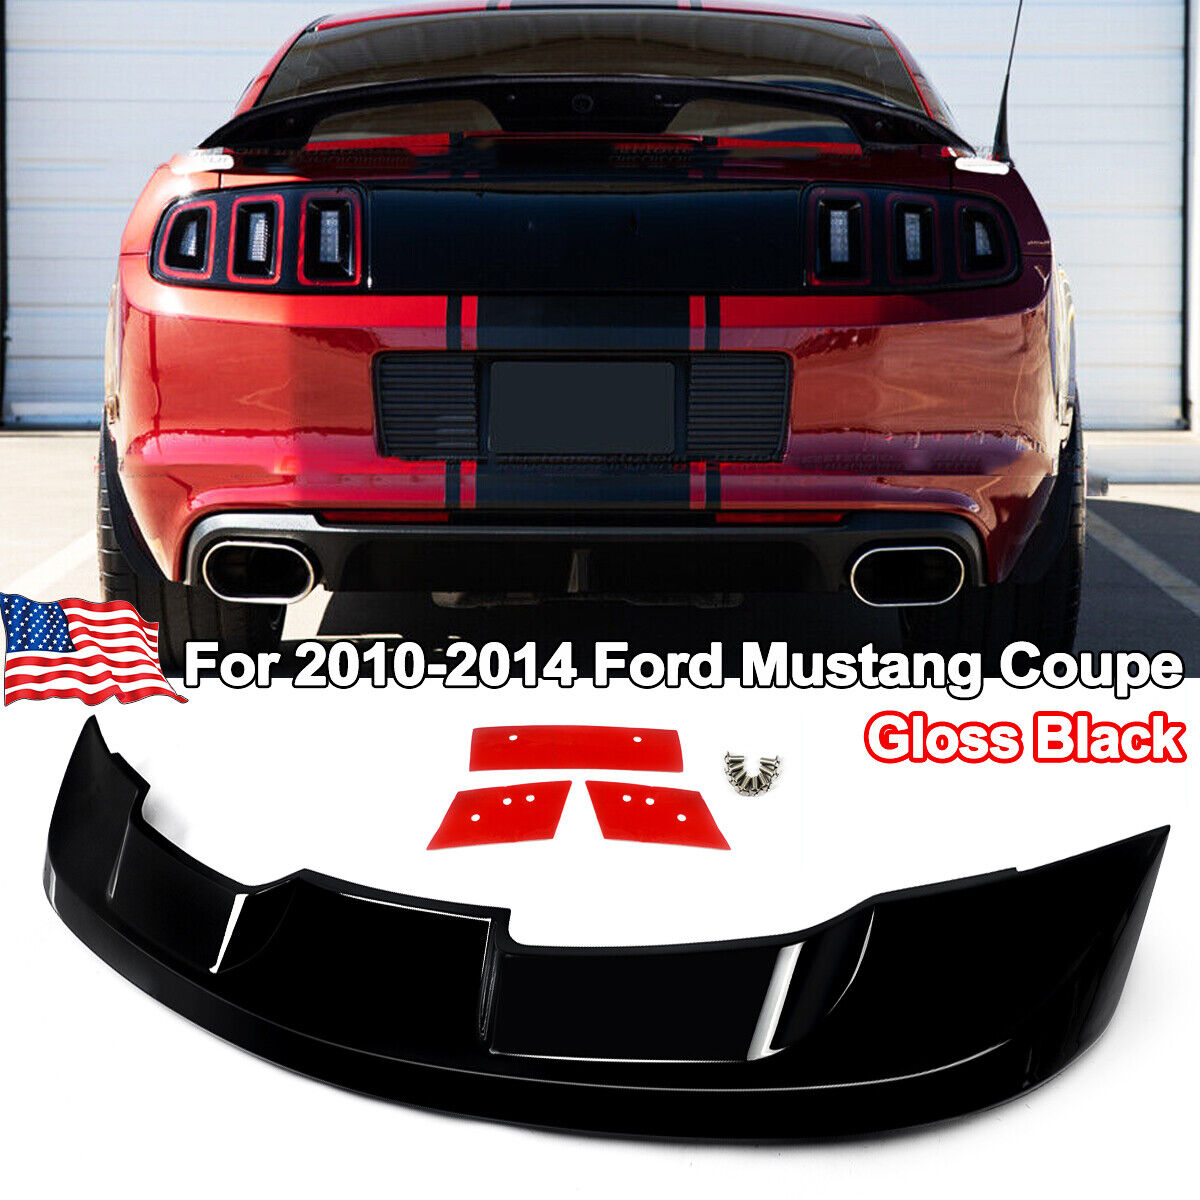 Glossy Black New 2022 GT500 Style Trunk Lid Spoiler For Ford Mustang 2010-2014